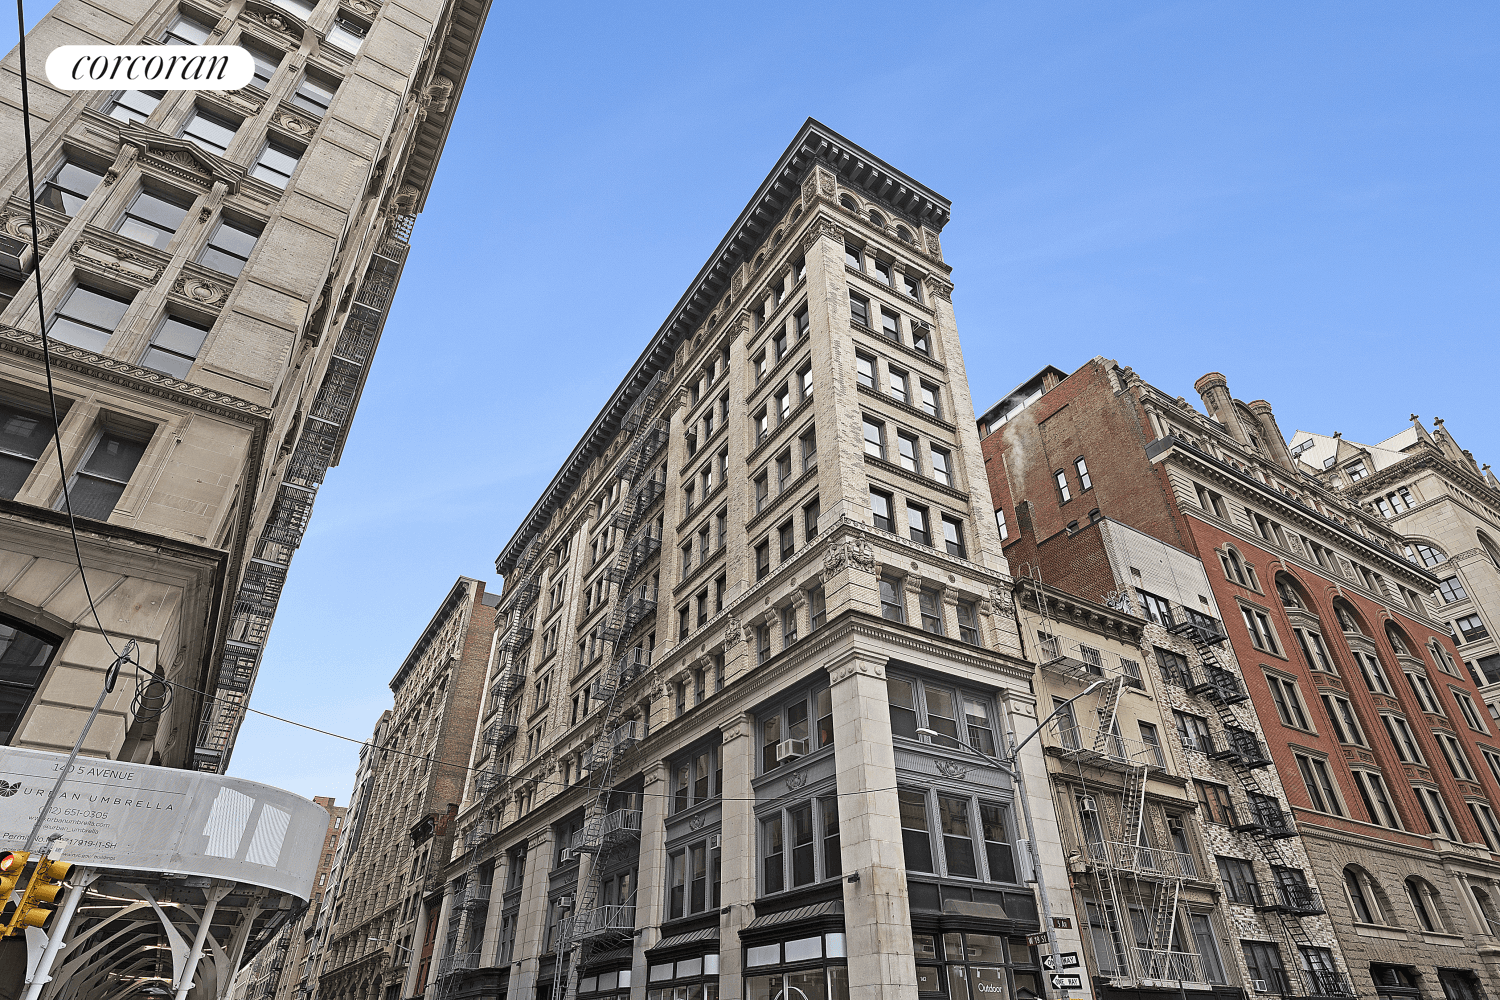 142 Fifth Avenue in combination with 5 West 19th Street.